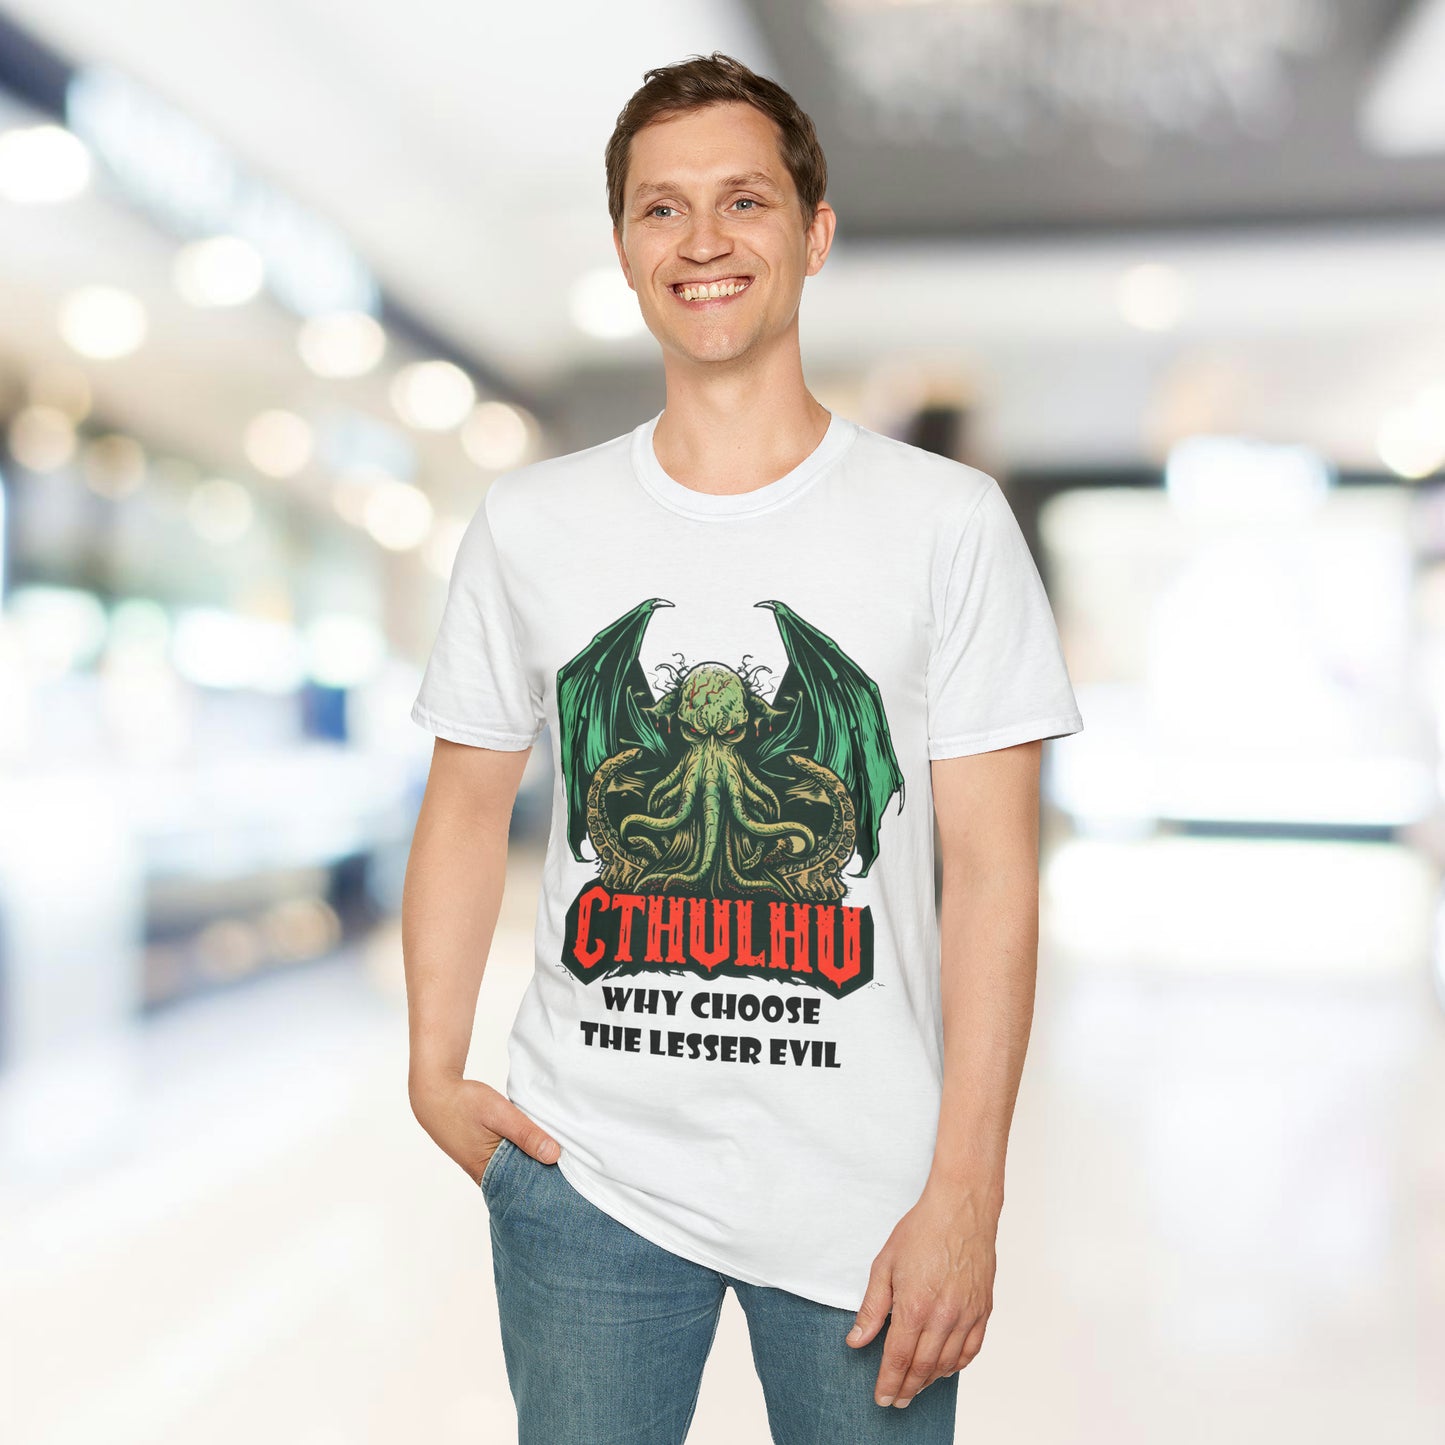 Cthulhu Why Choose The Lesser Evil - Unisex Softstyle T-Shirt